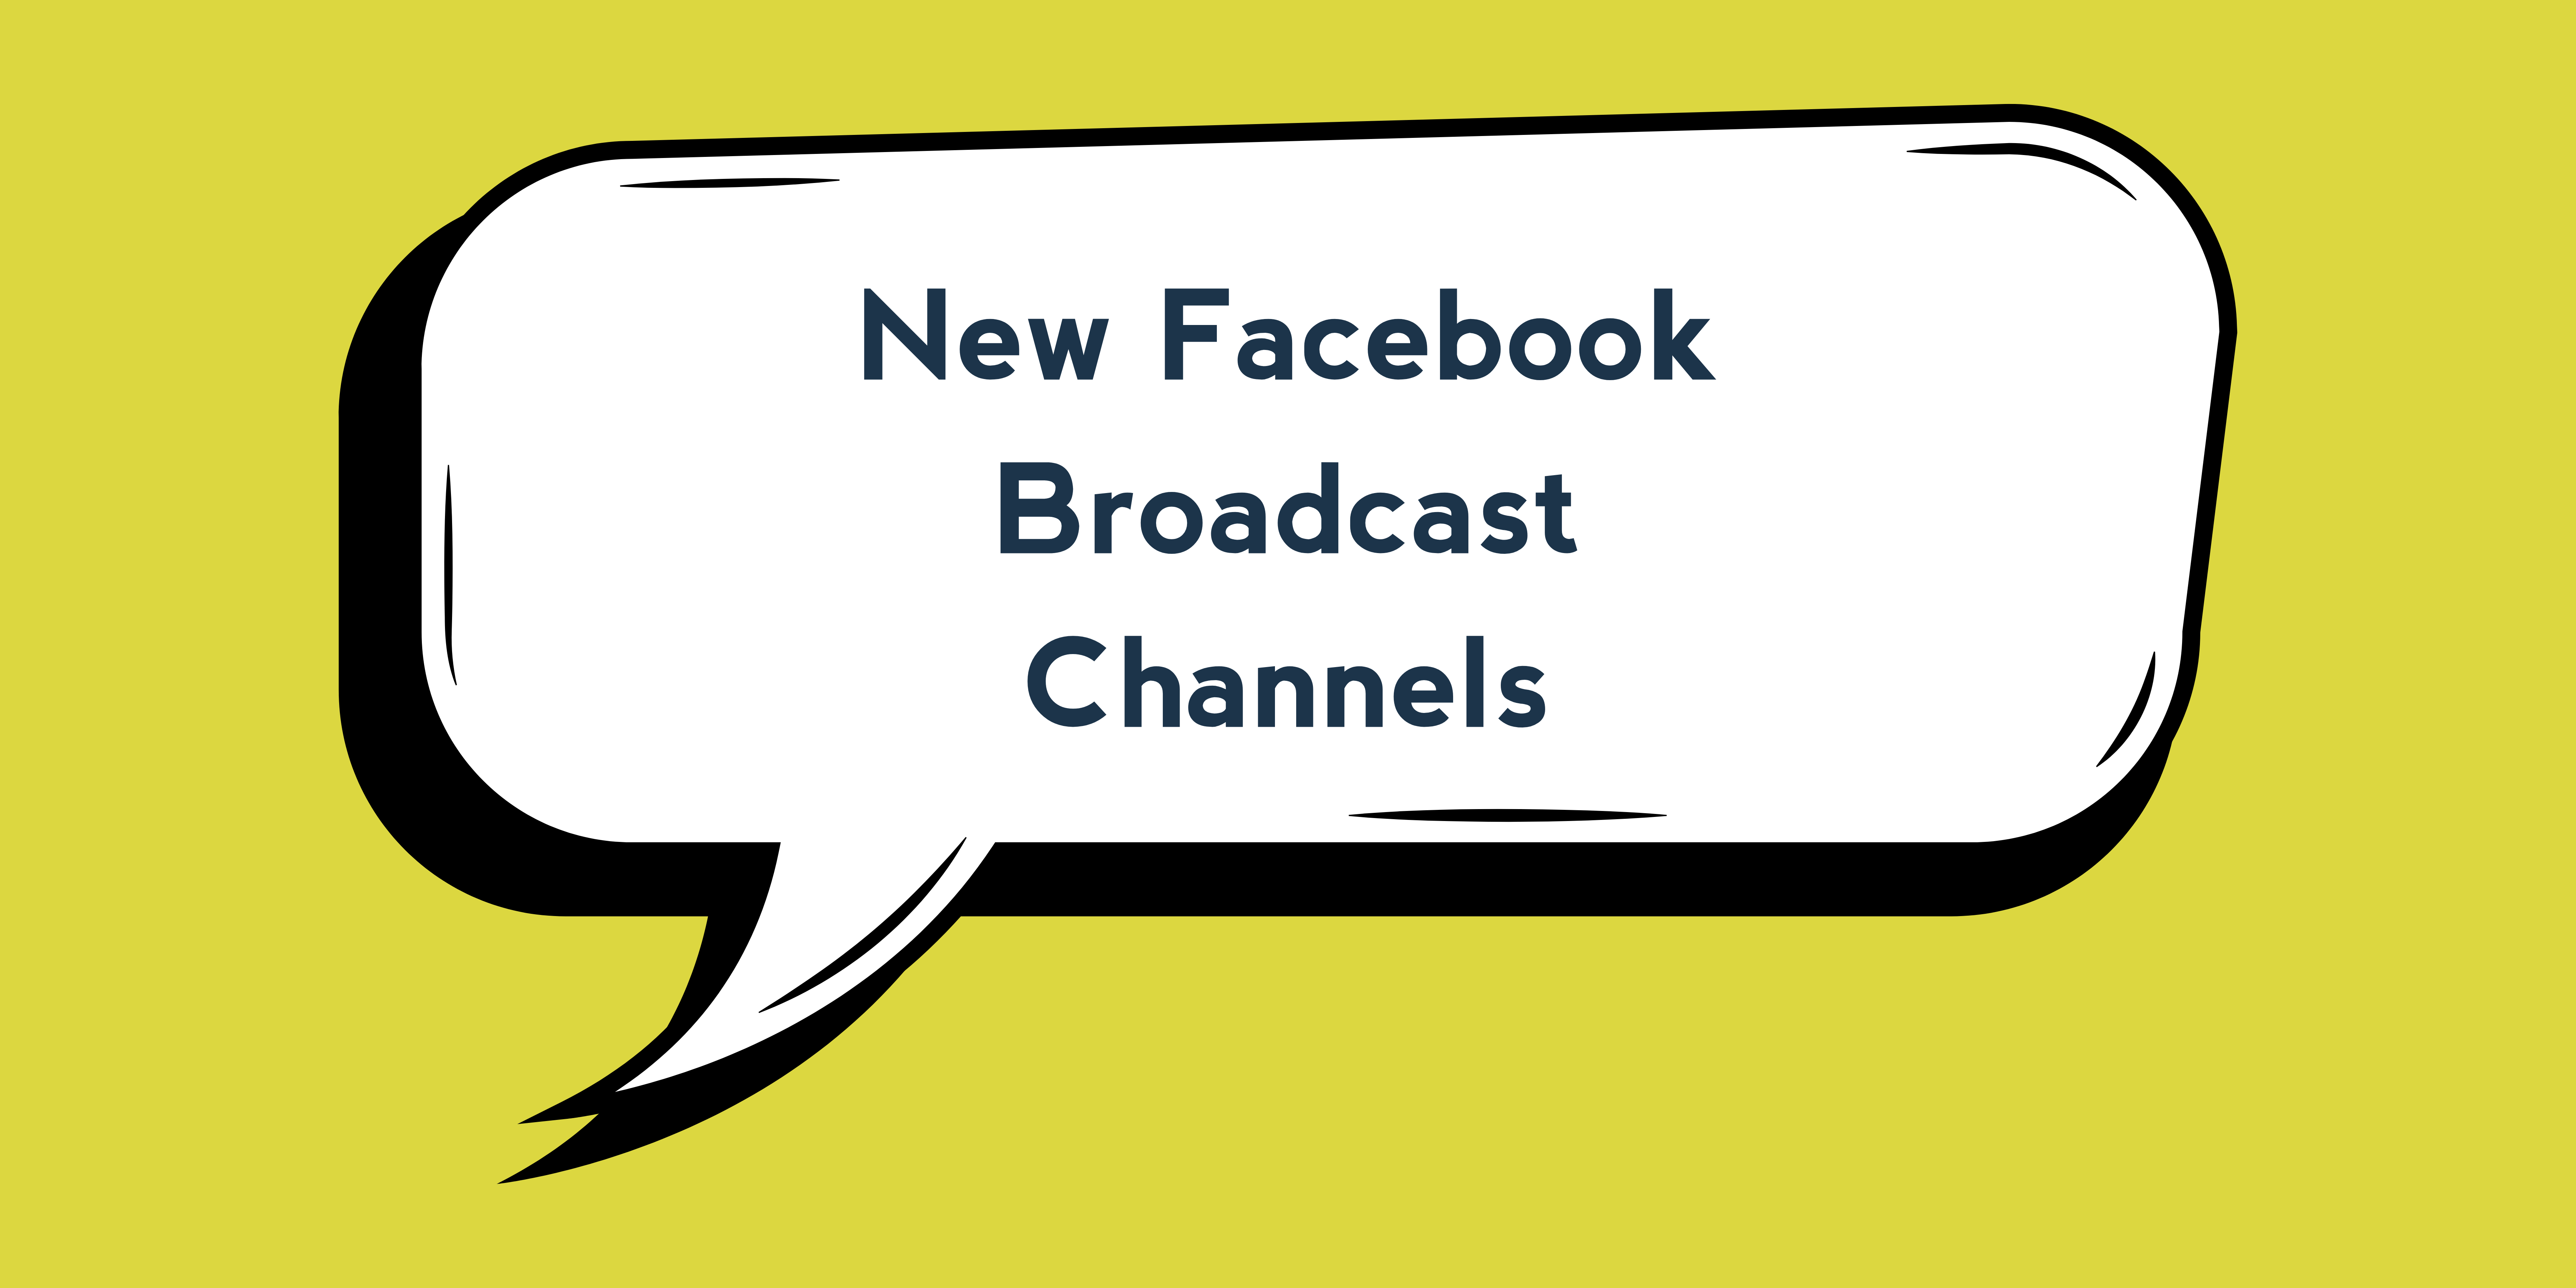 New Facebook Broadcast Channels